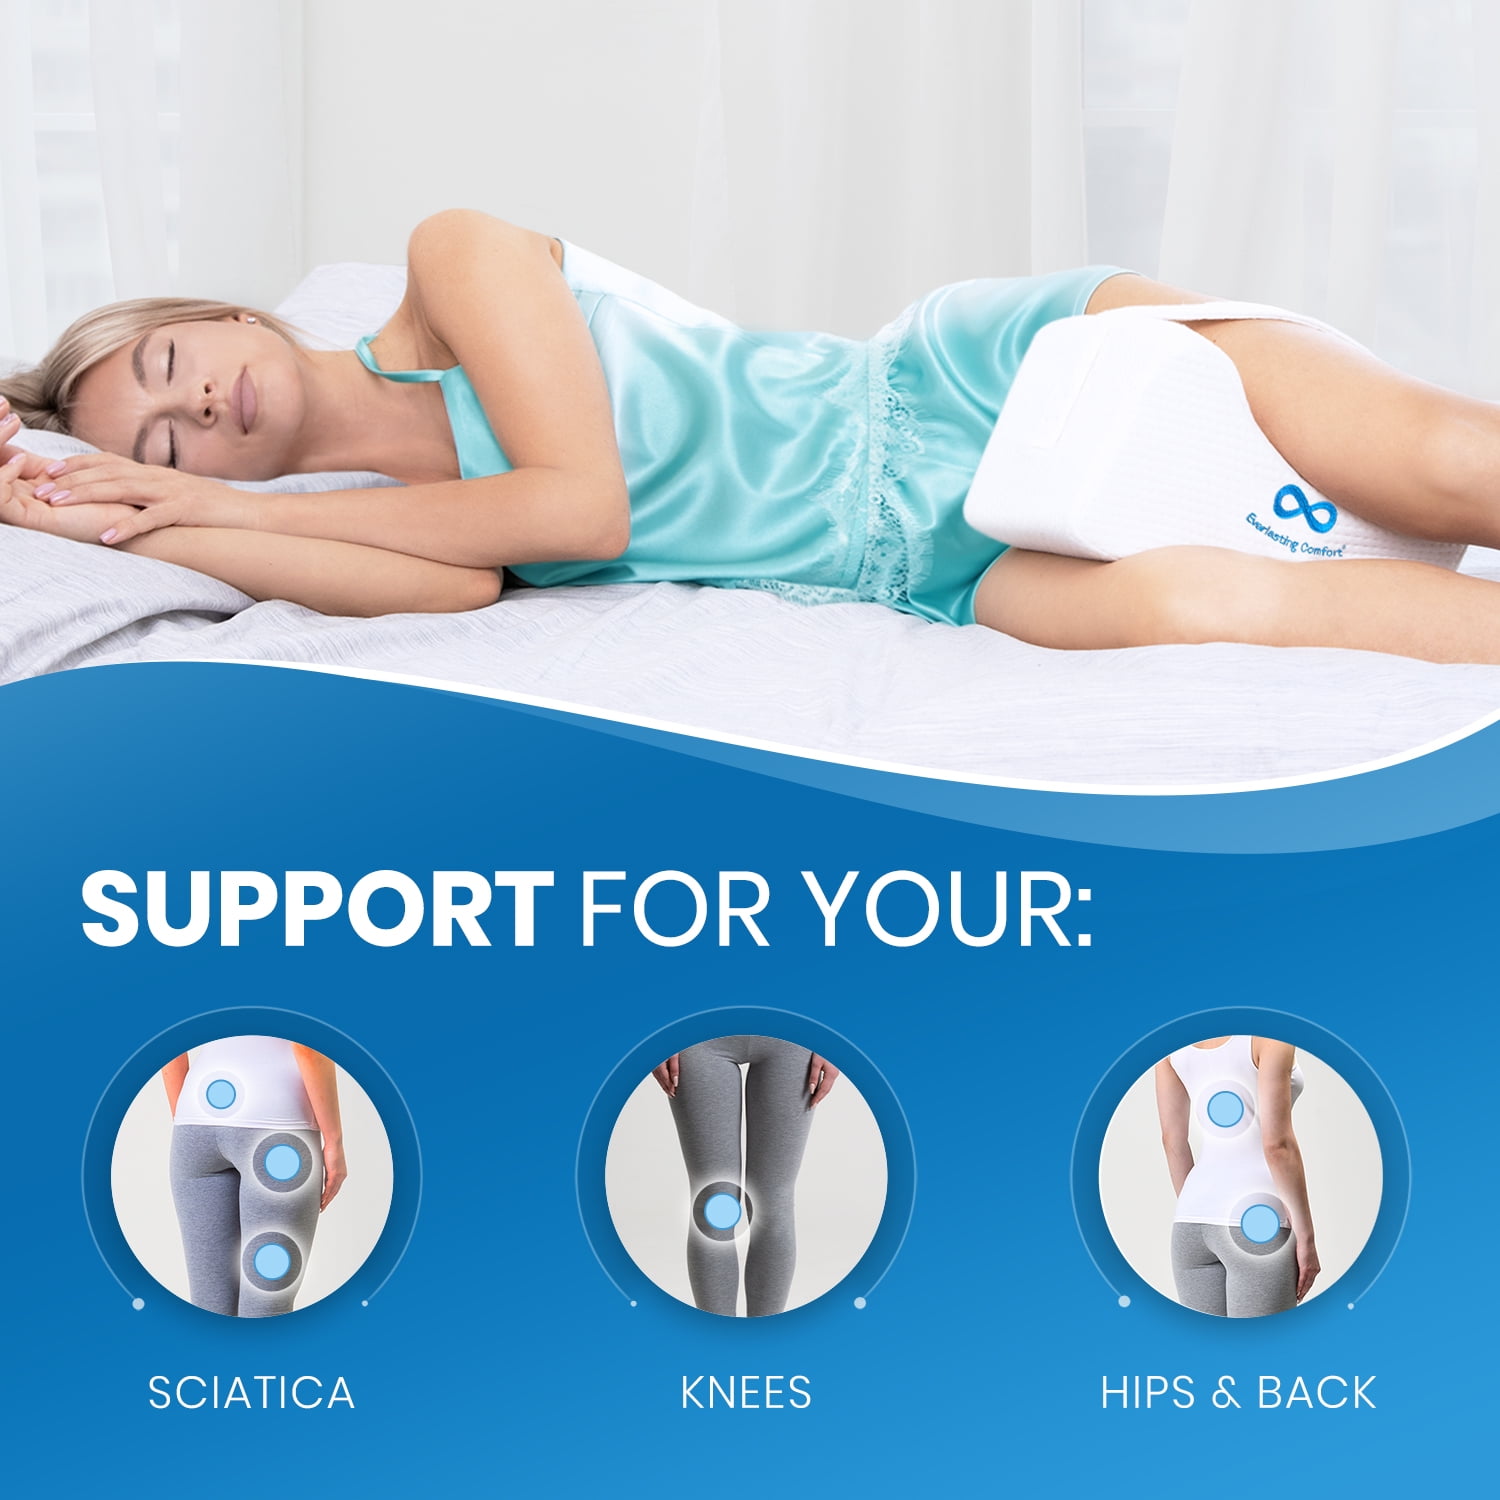 Up to 55% off an Everlasting Comfort Knee Pillow